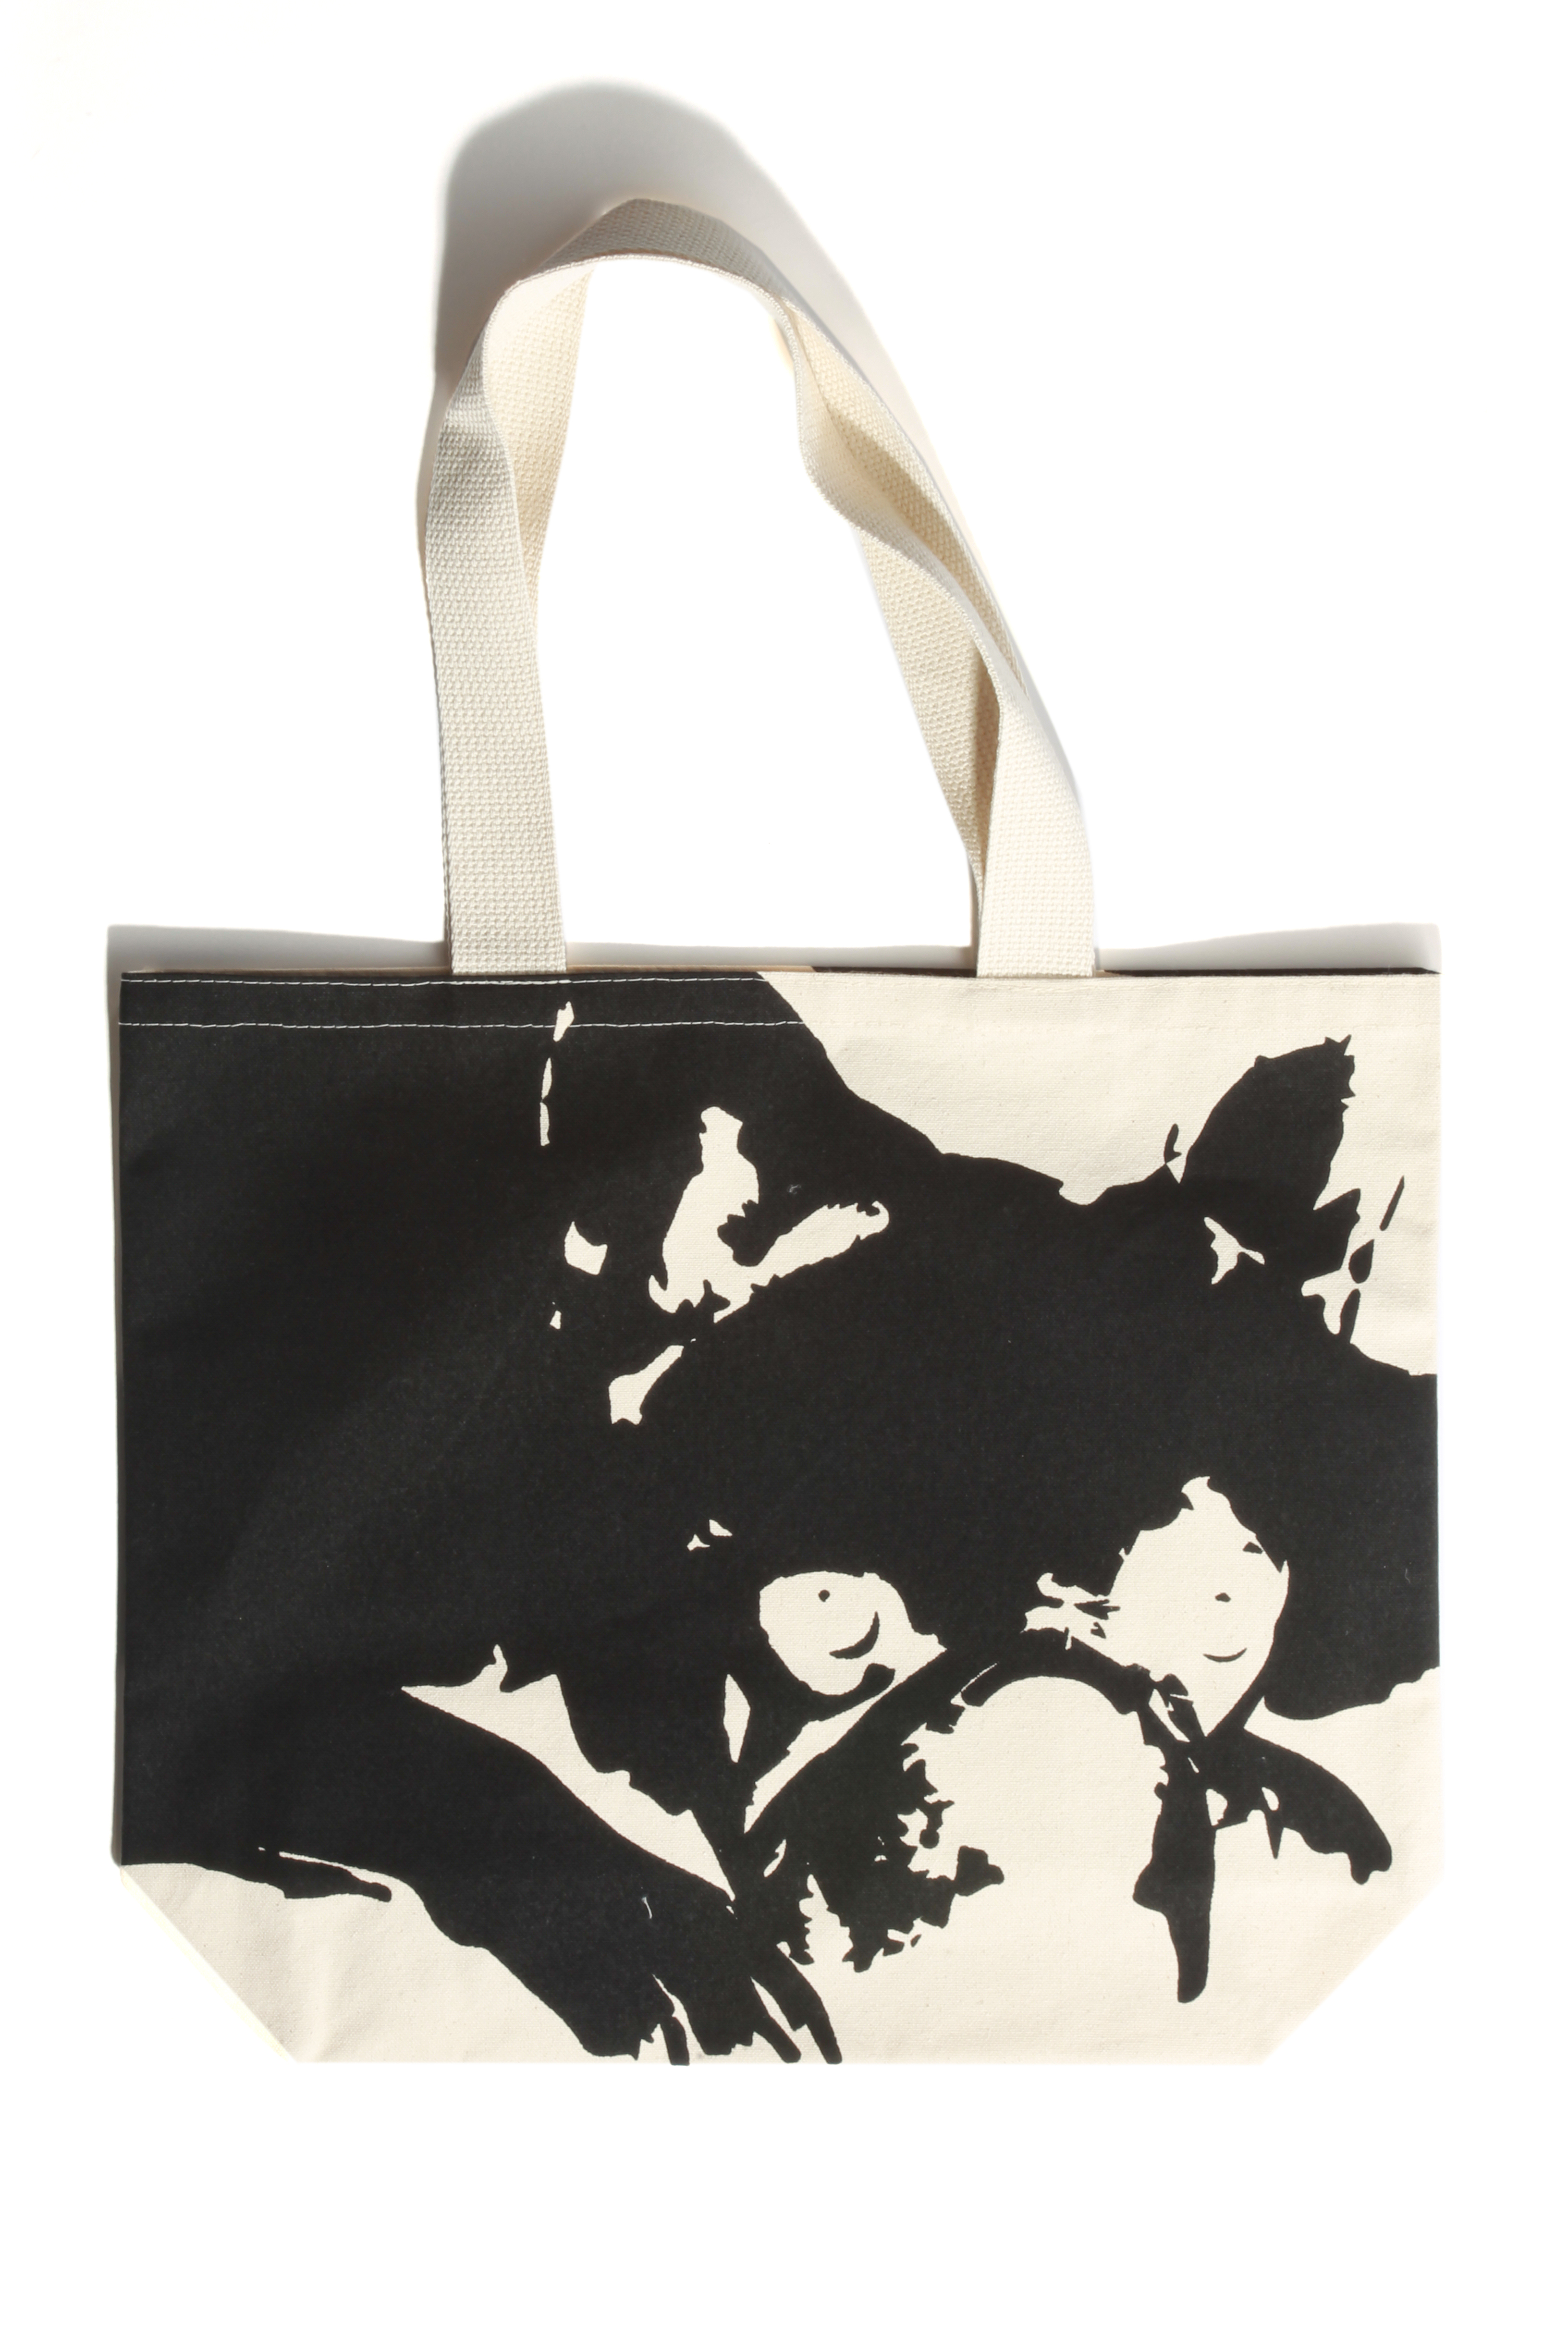 One of the tote designs featuring Juanita MORE!'s French Bulldog Jackson. Photo by Bob Toy.